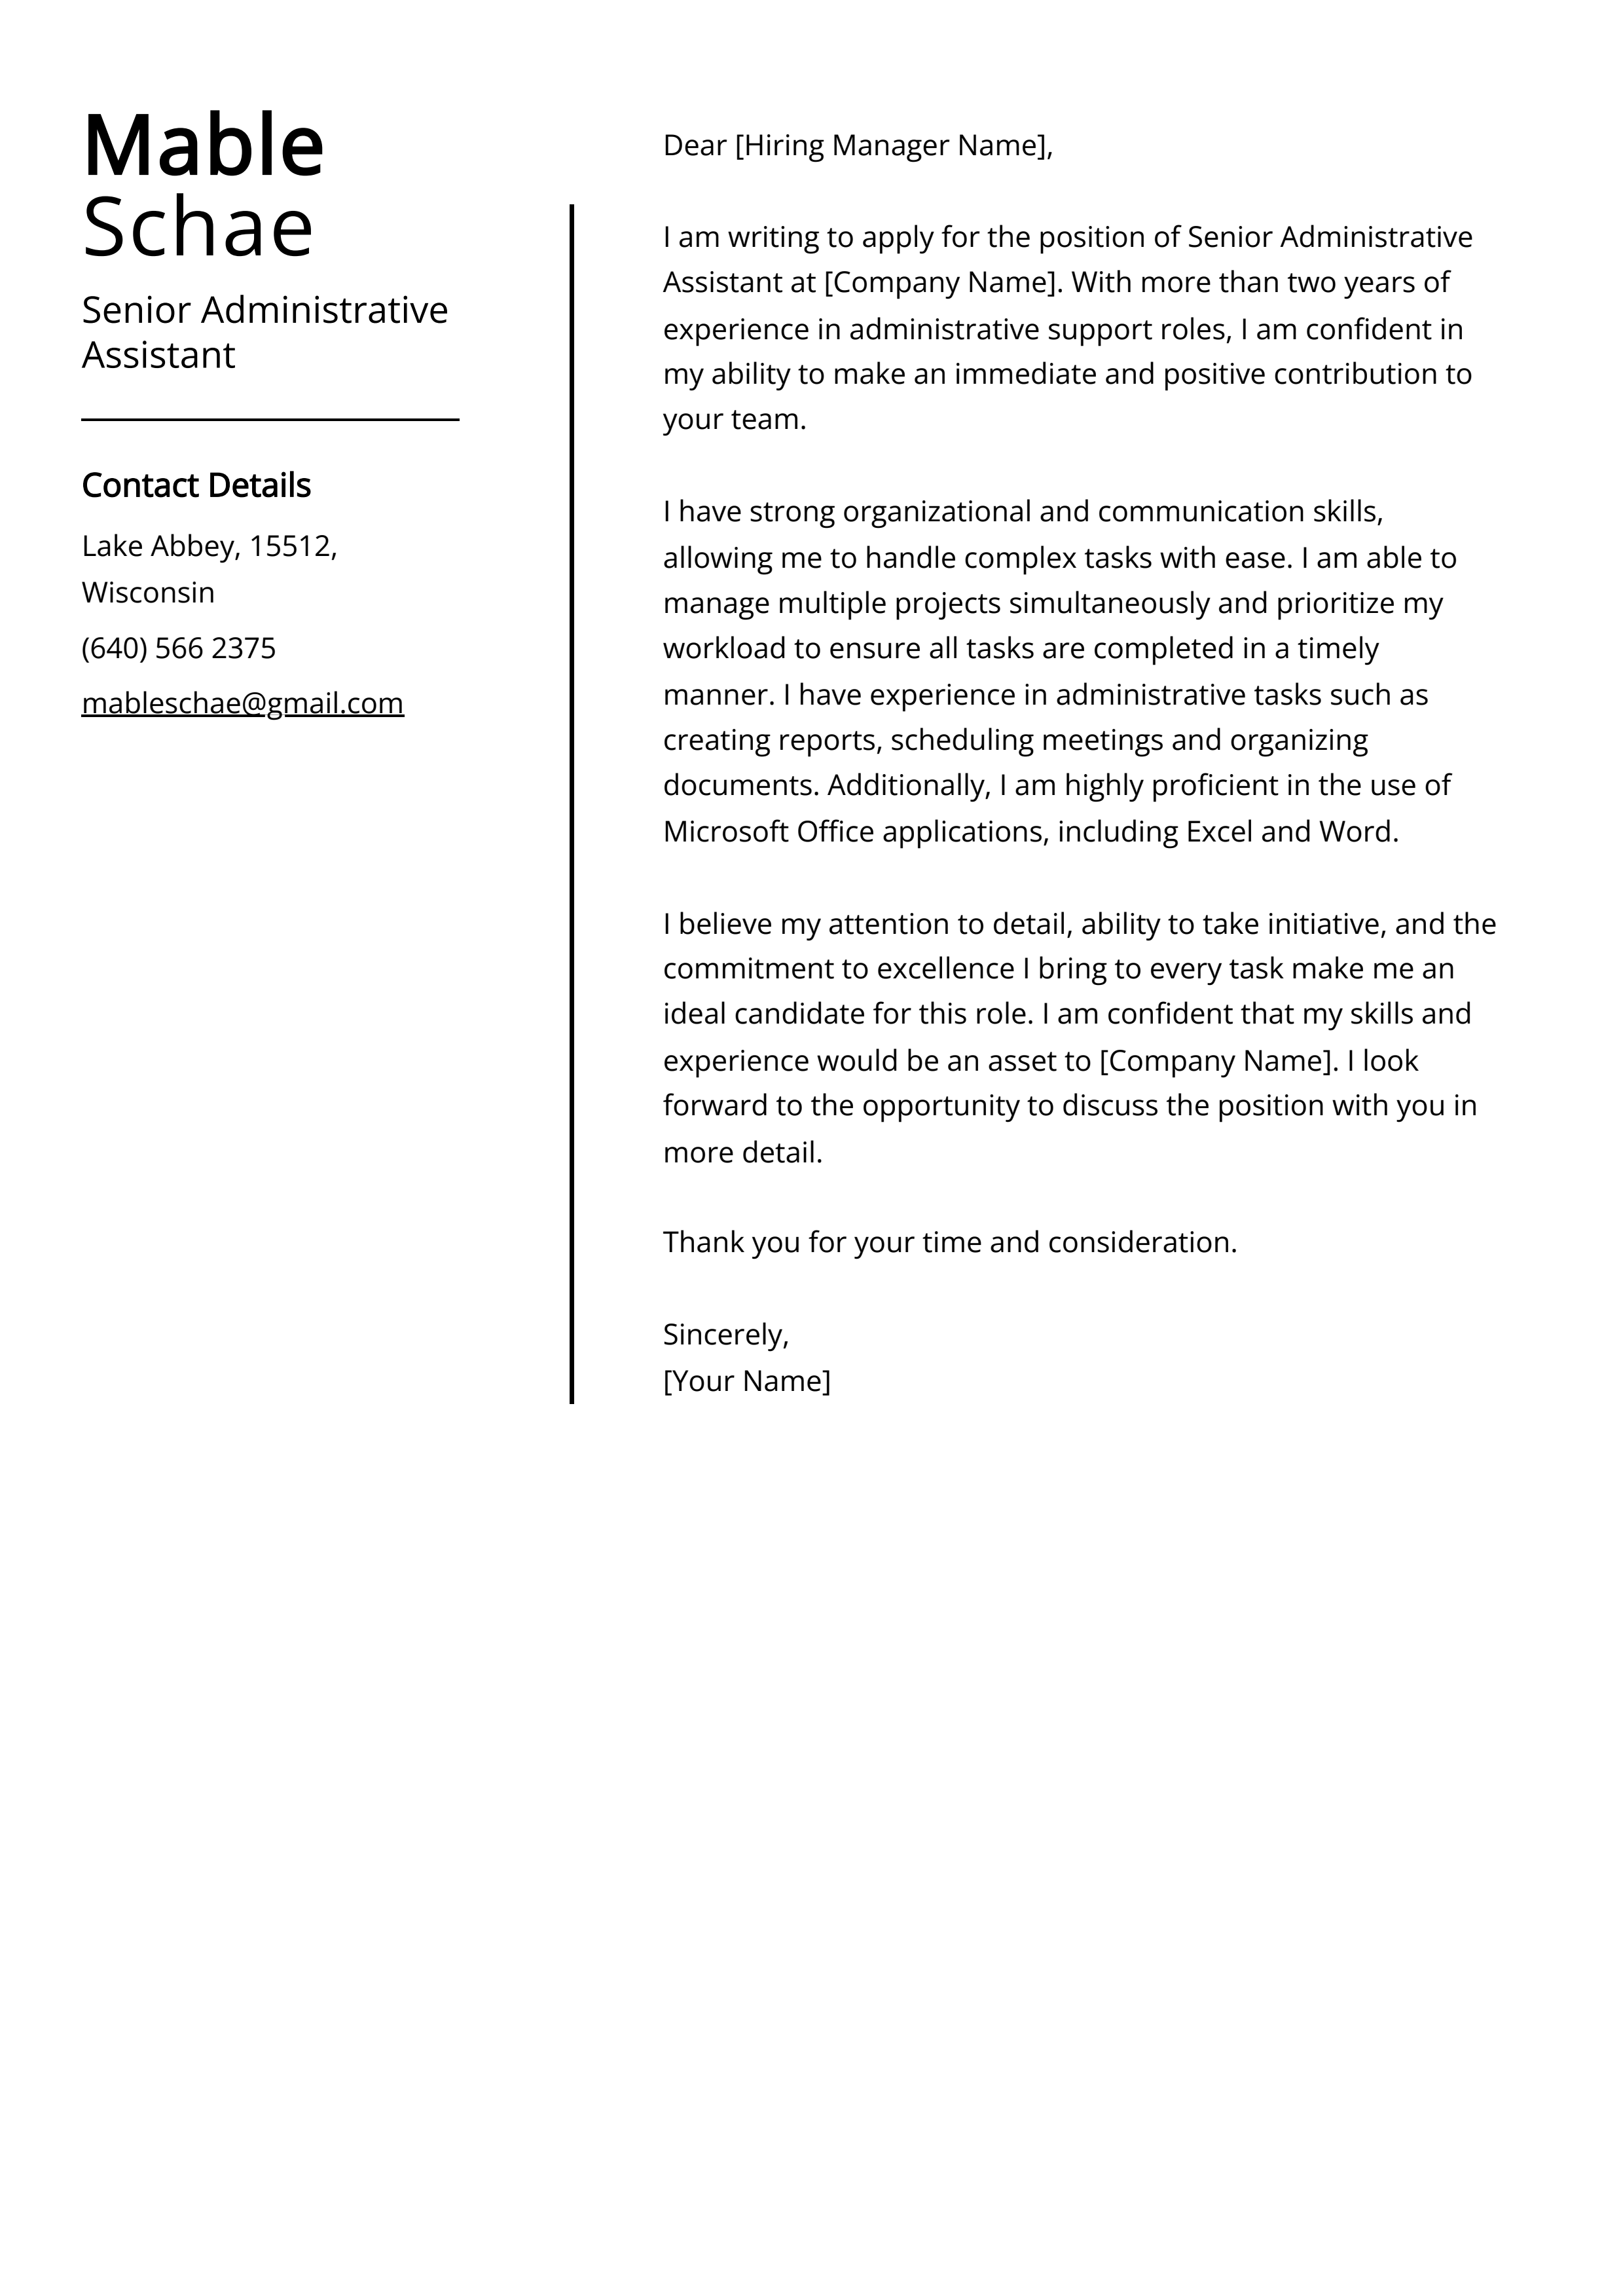 Senior Administrative Assistant Cover Letter Example